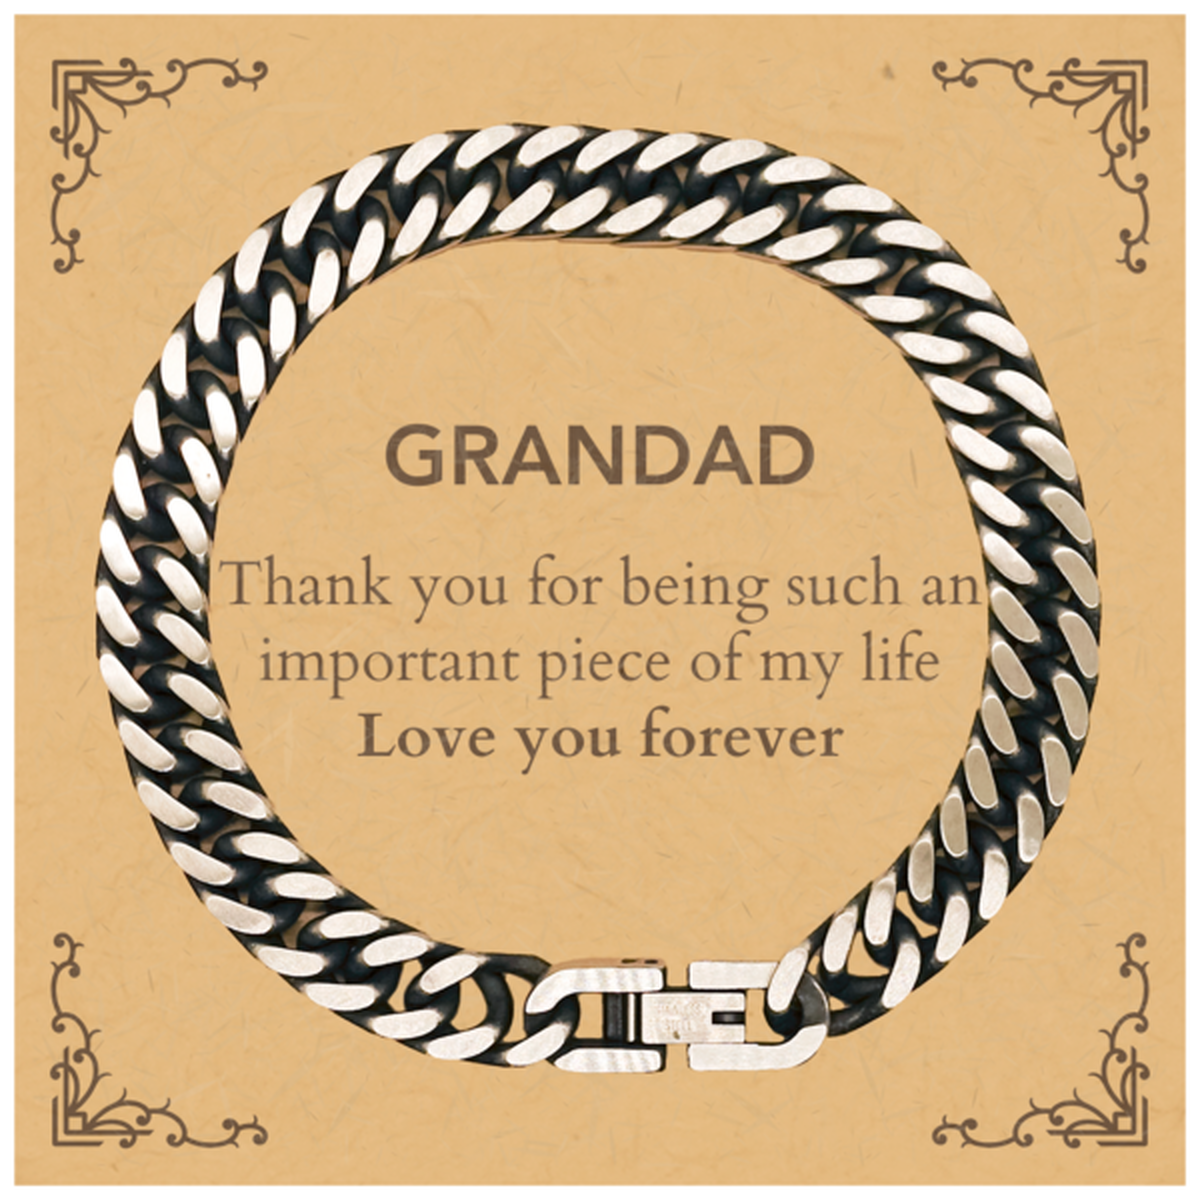 Appropriate Grandad Cuban Link Chain Bracelet Epic Birthday Gifts for Grandad Thank you for being such an important piece of my life Grandad Christmas Mothers Fathers Day